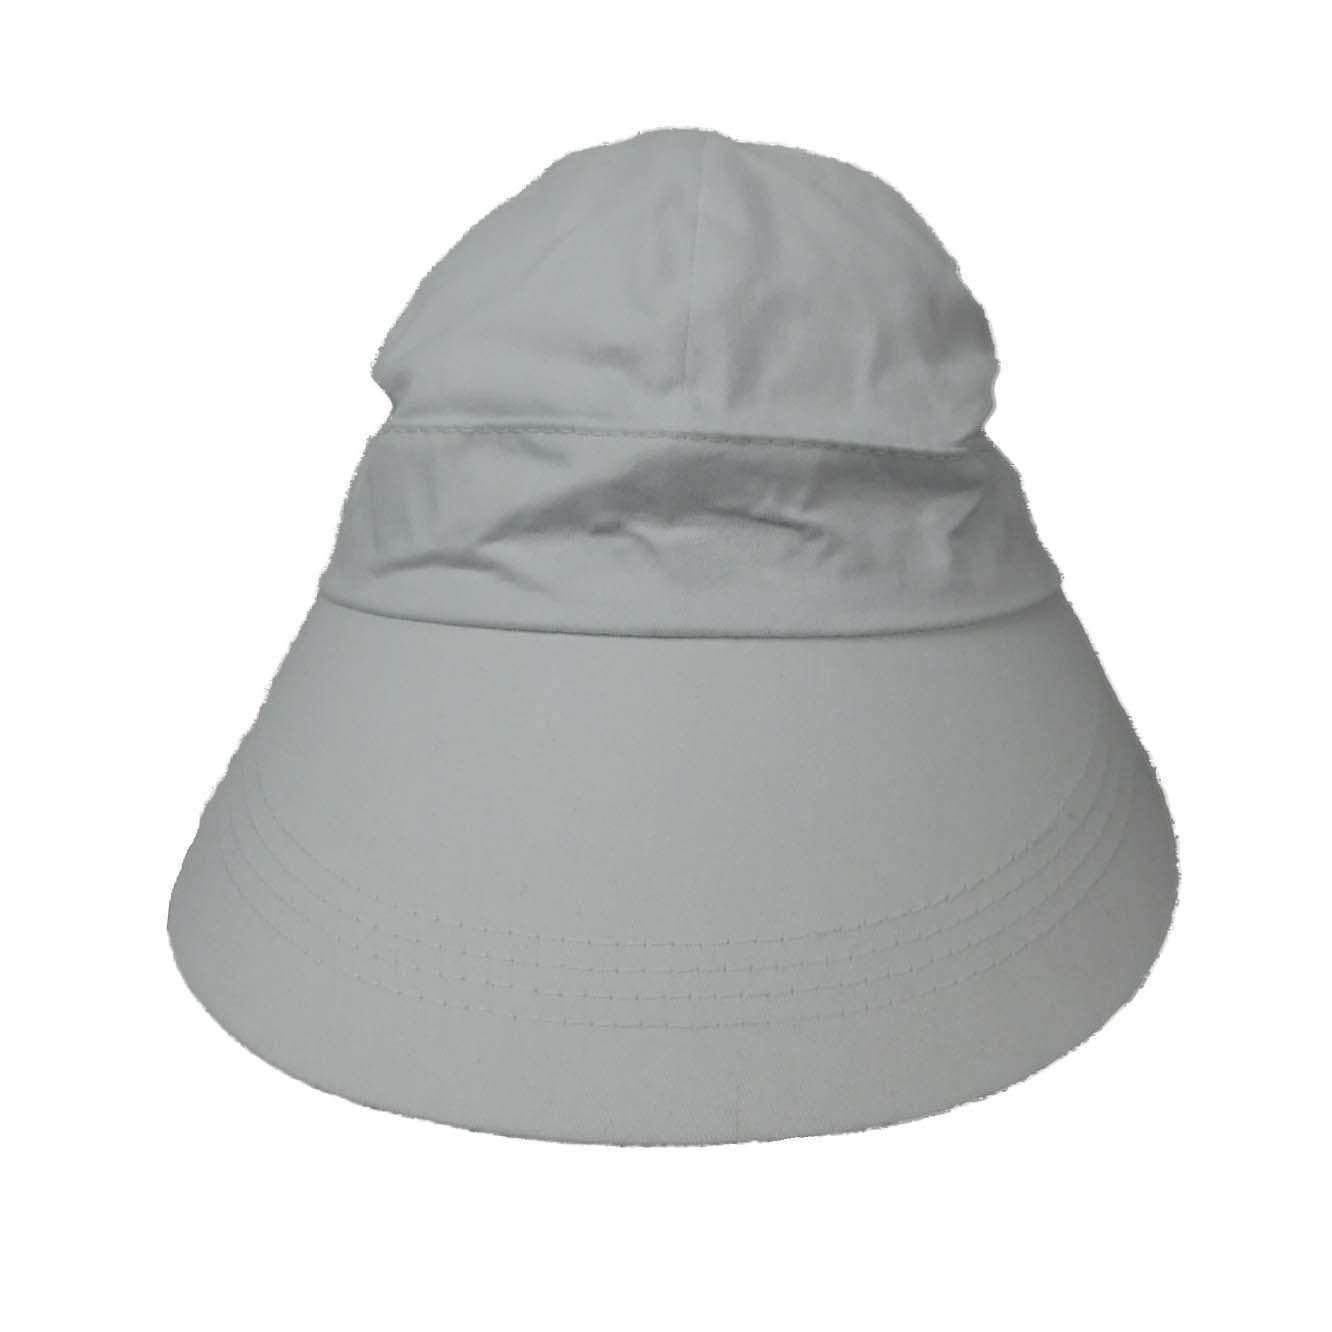 Skull Cap Poly/cotton With Coolmax Top & Adjustable Velcro